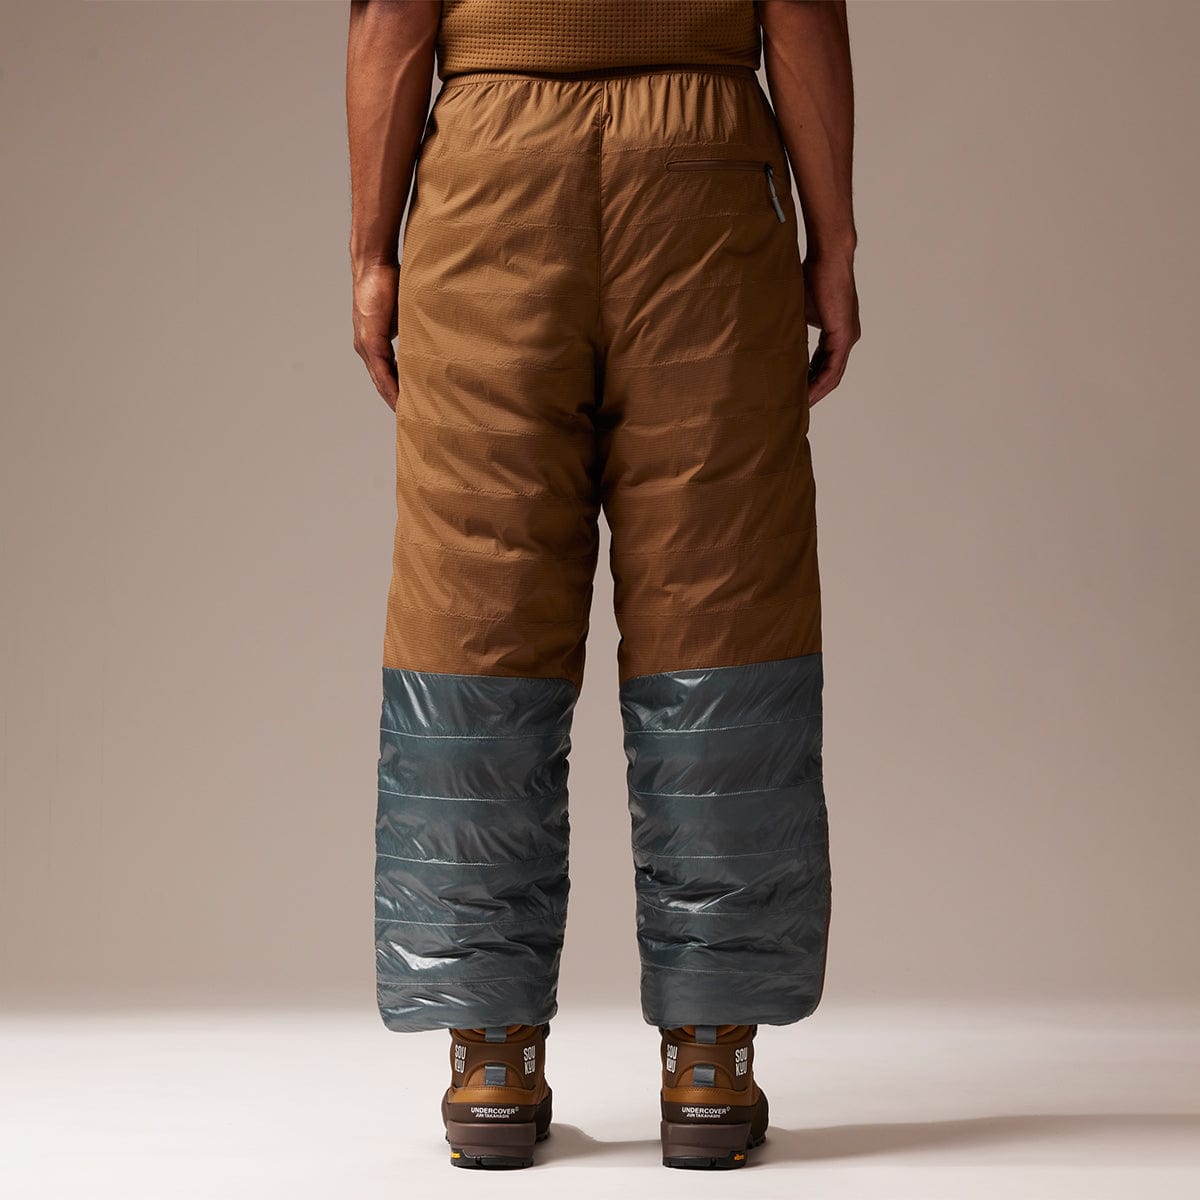 The North Face Bottoms SOUKUU BY THE NORTH FACE X UNDERCOVER PROJECT U 50/50 PANT